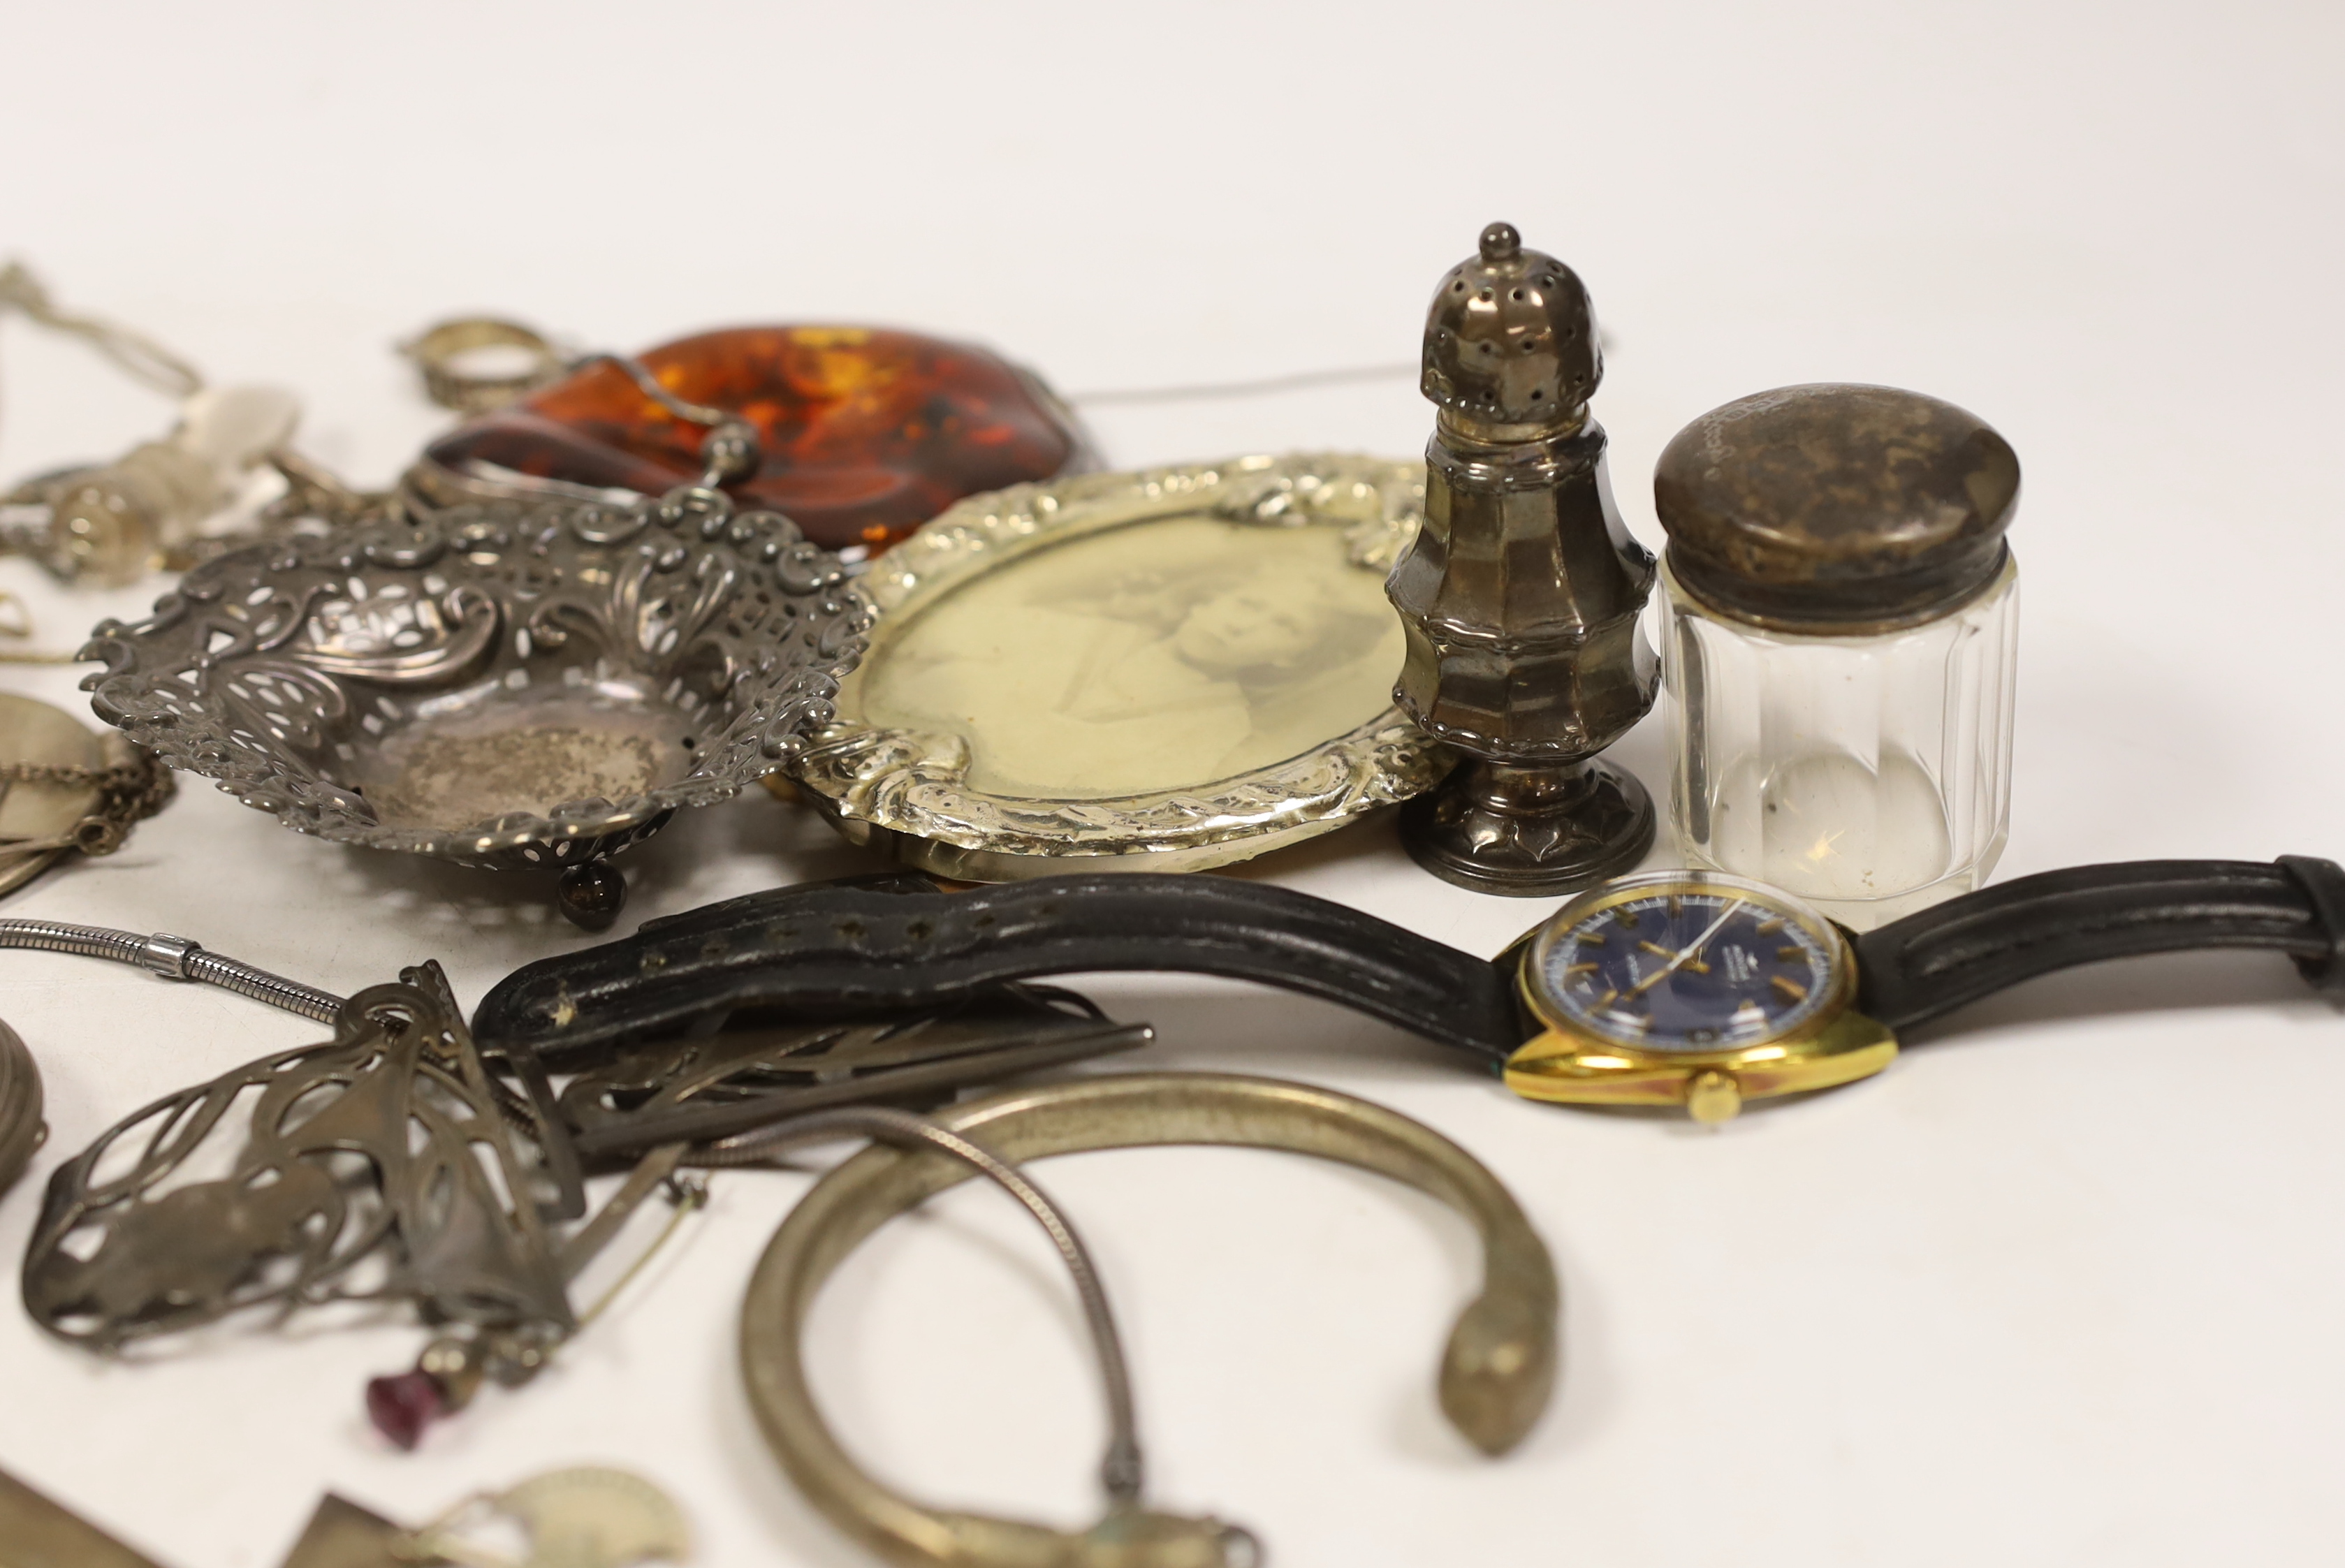 Miscellaneous silver including cigarette case, pepperette, bonbon dish, vesta case and belt buckle, a wrist watch and pocket watch and assorted jewellery including a large sterling mounted amber pendant and a Charles Hor